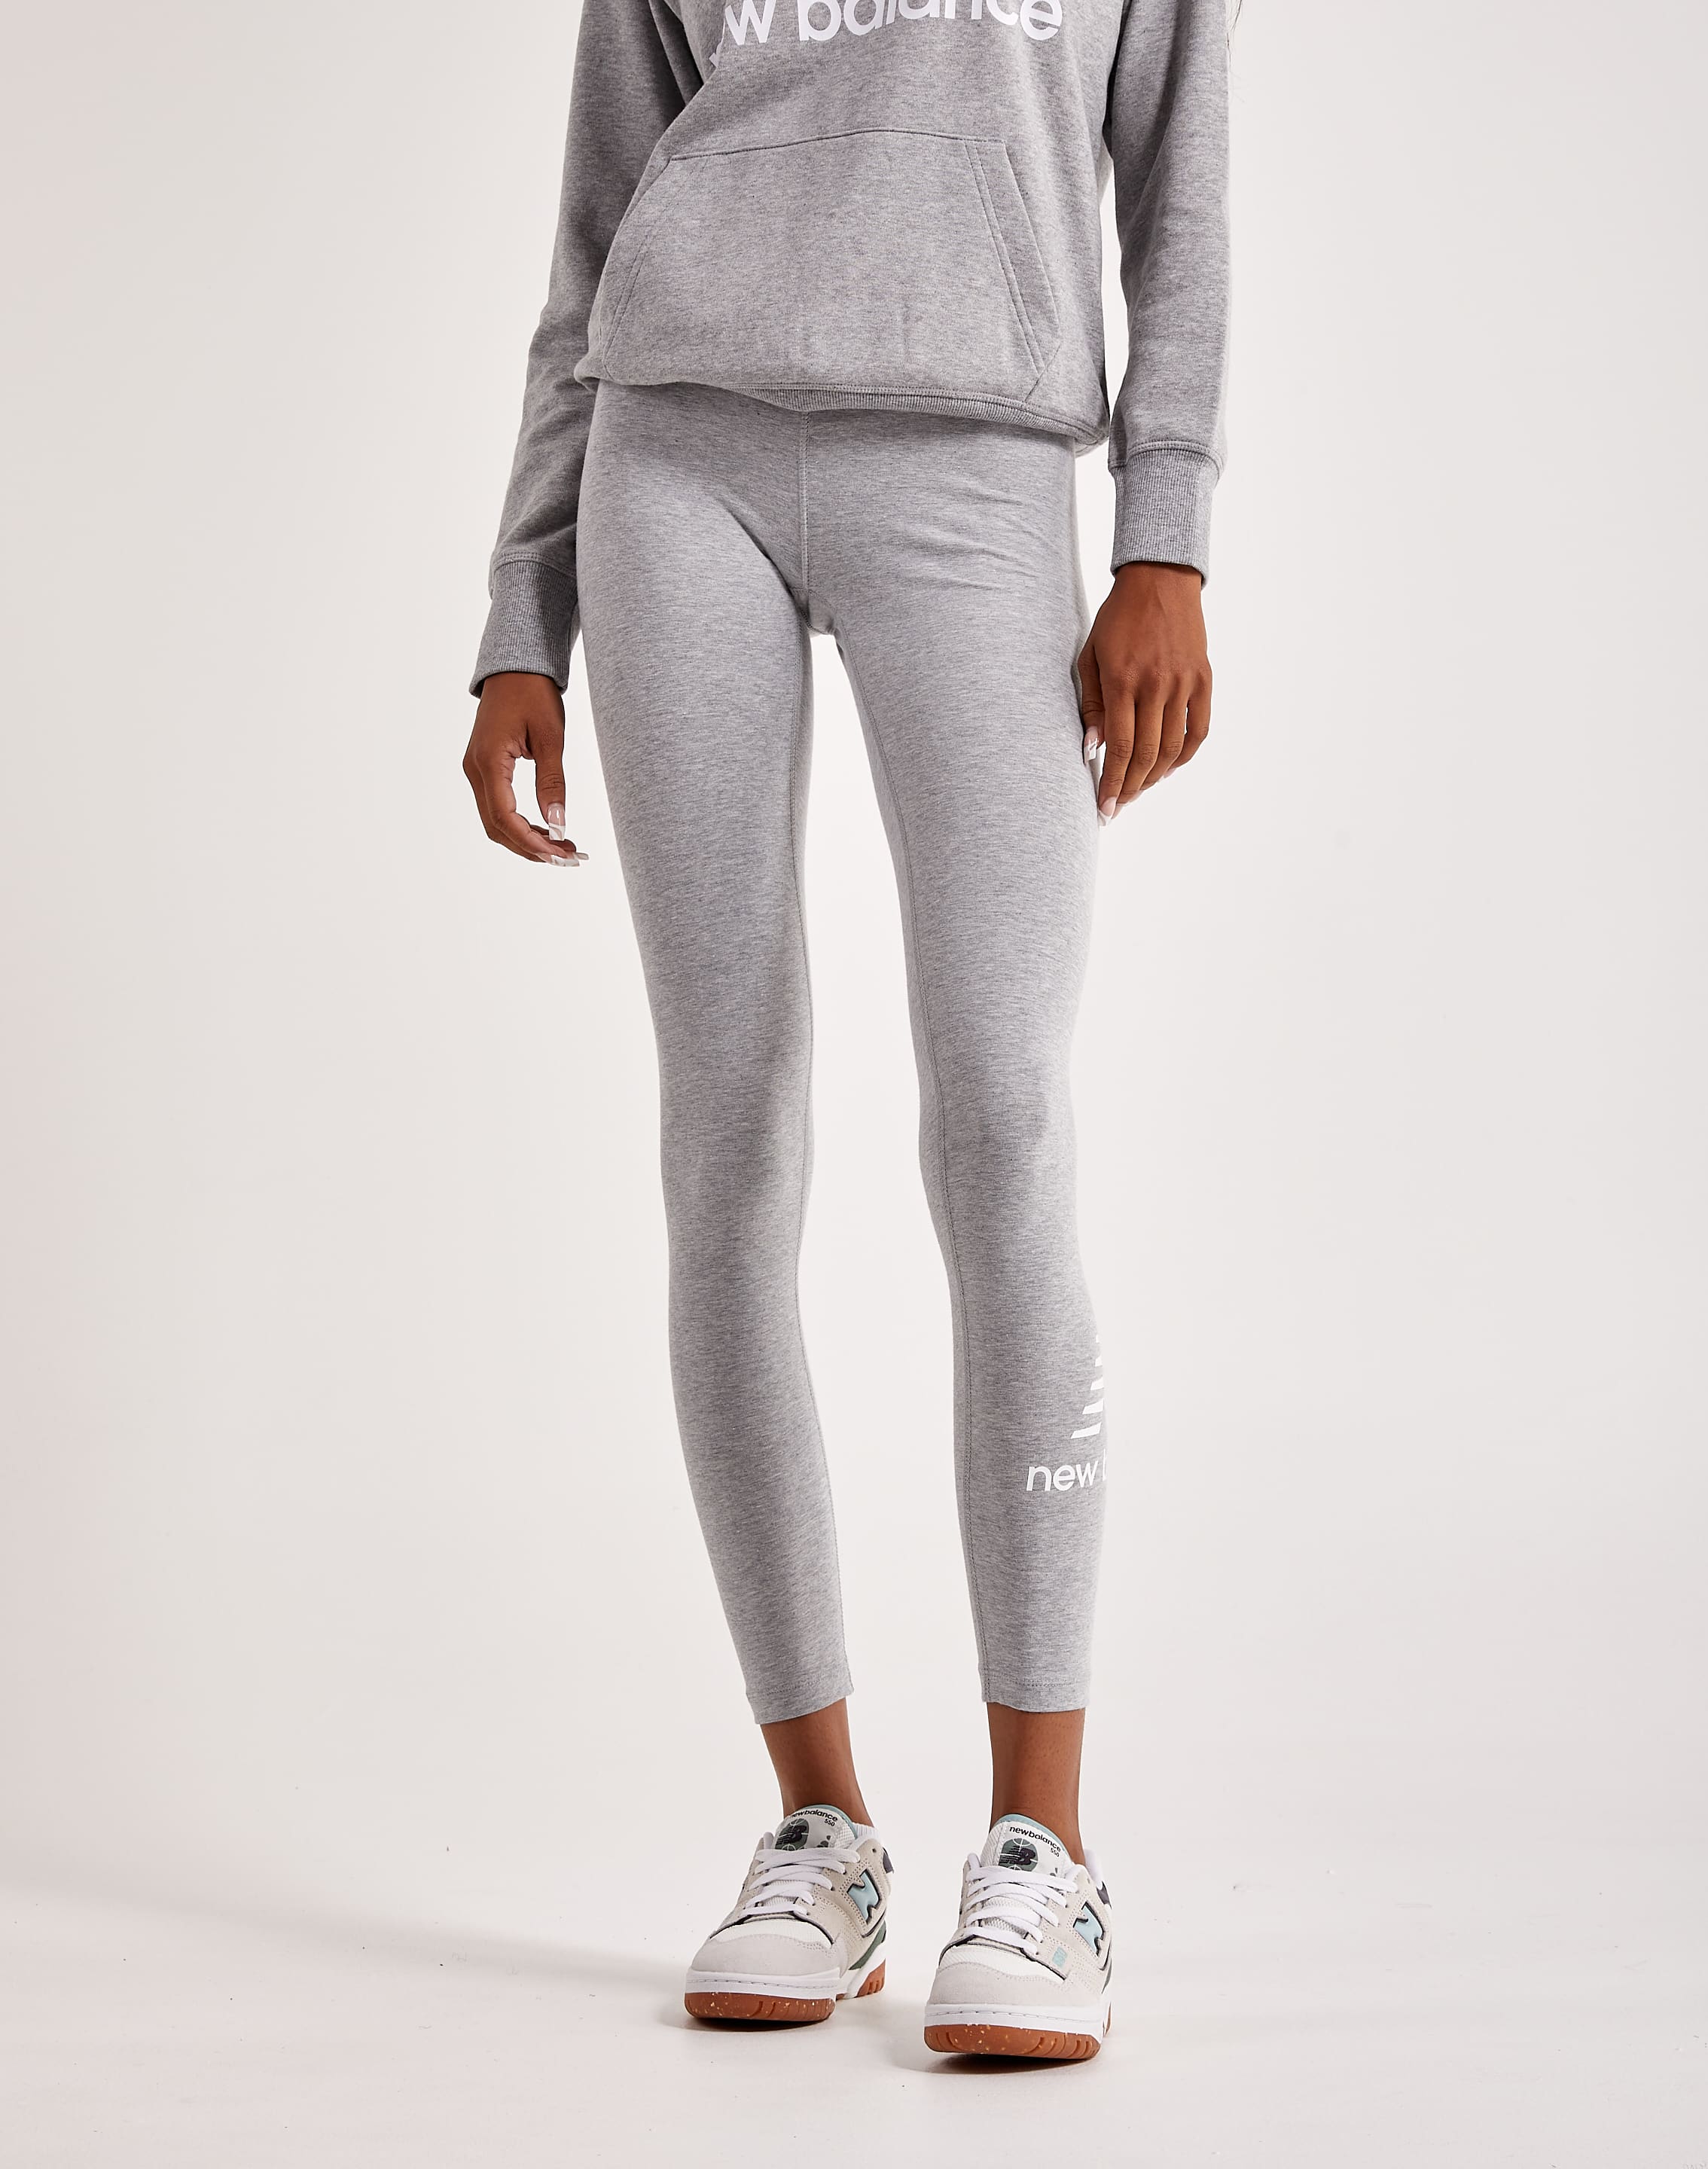 New Balance Women's NB Essentials Stacked Legging, Athletic Grey